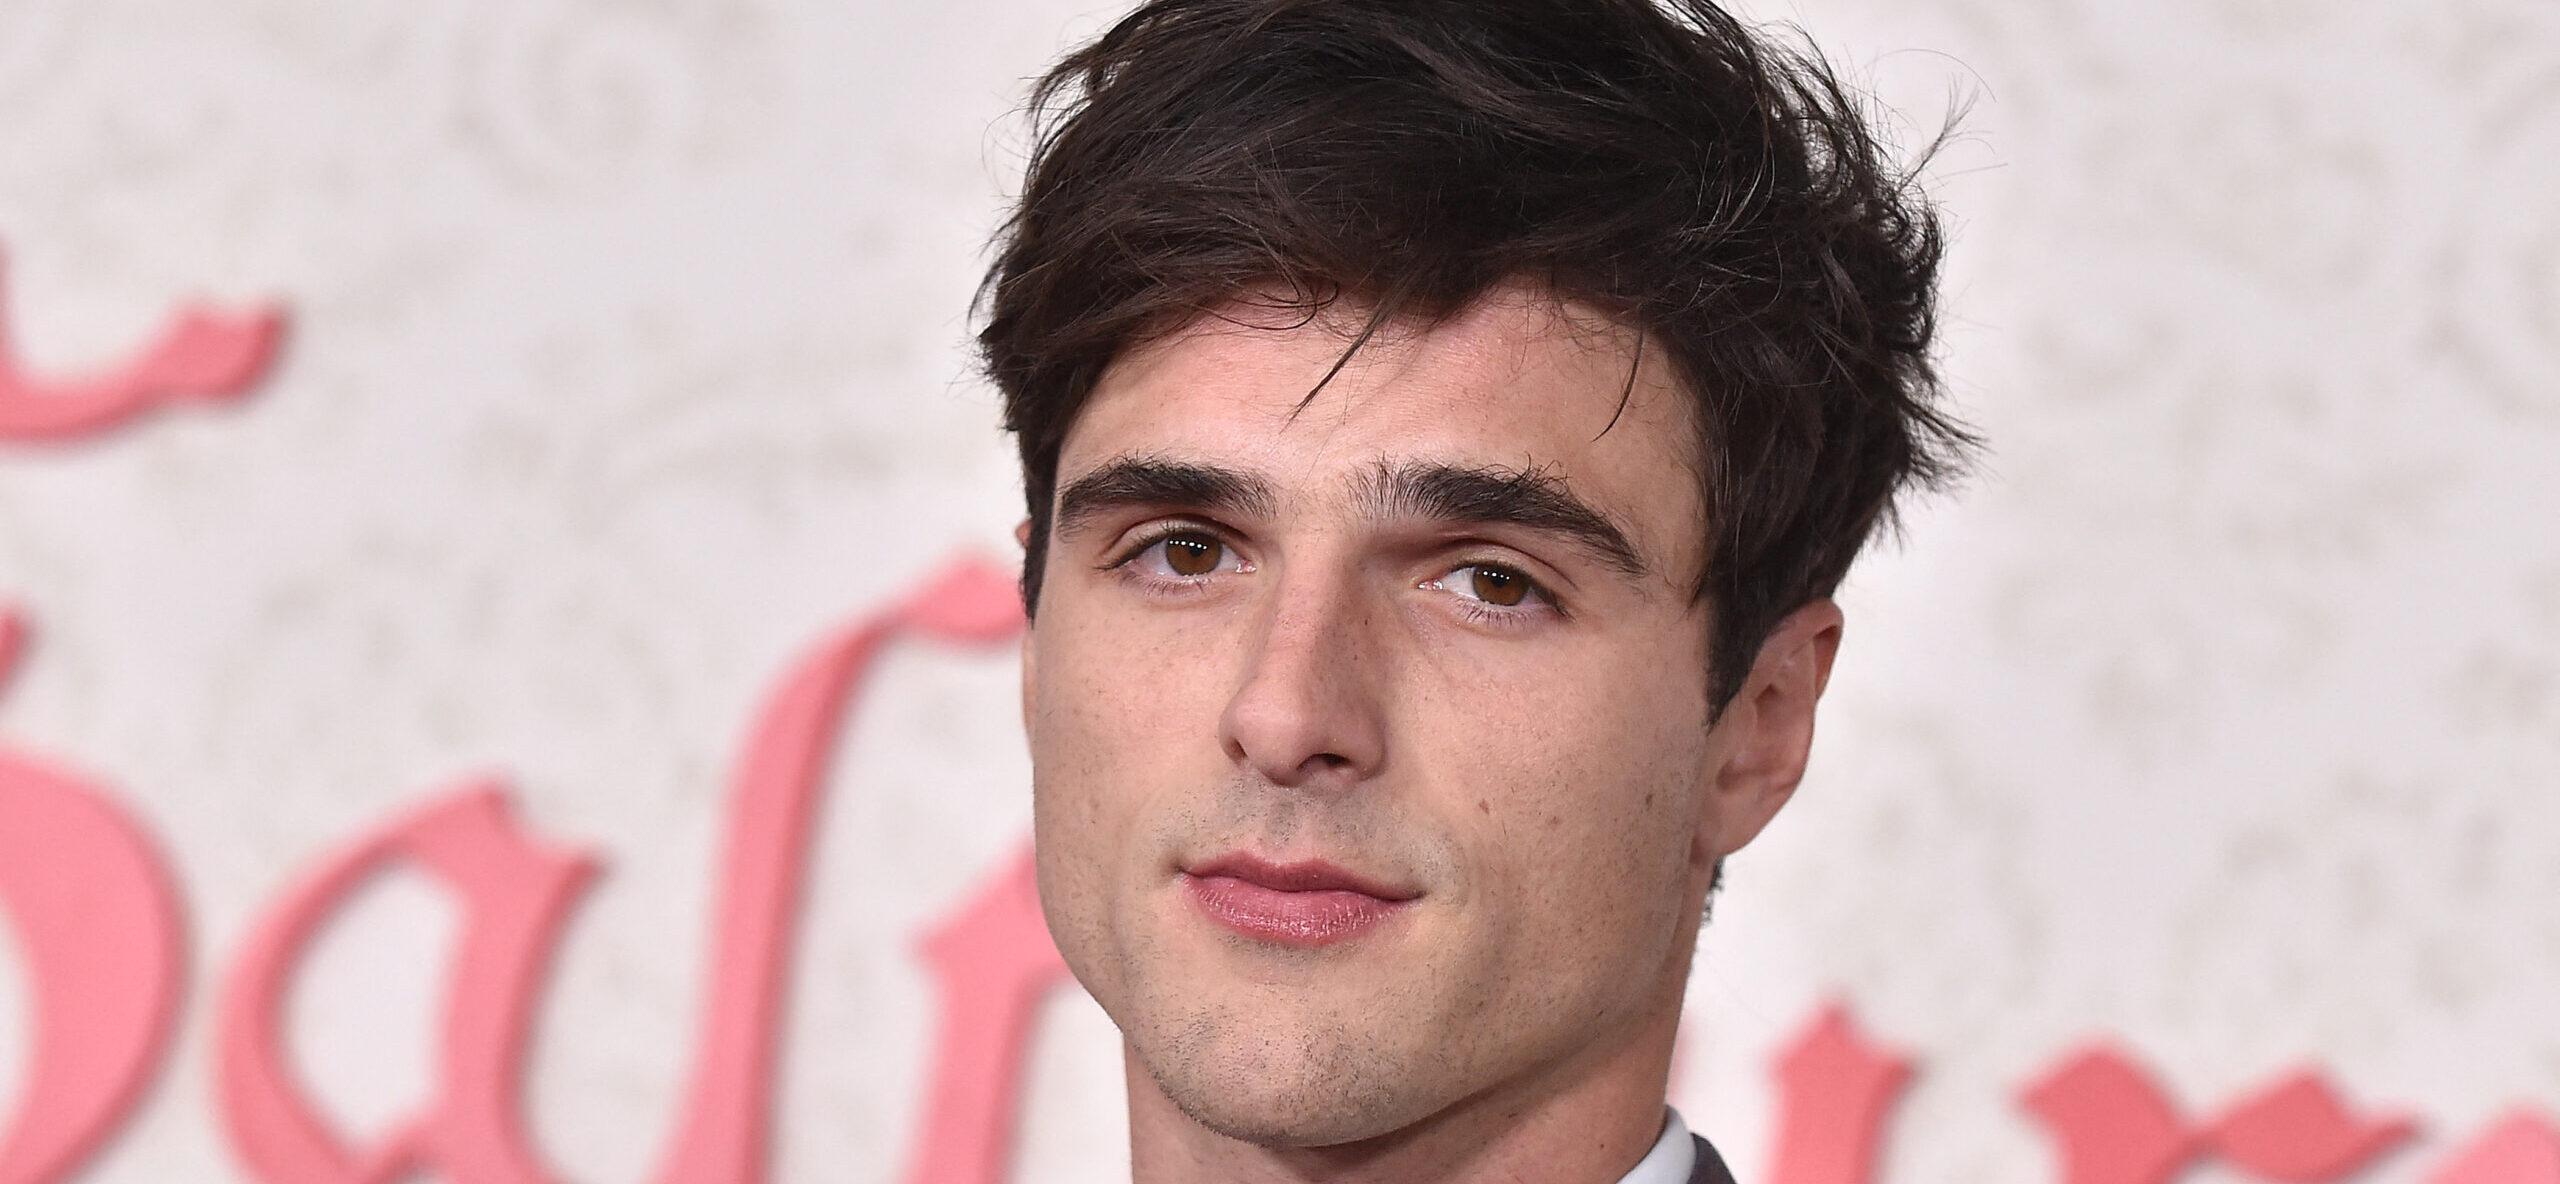 Jacob Elordi Under Police Investigation For Alleged Assault On A Reporter